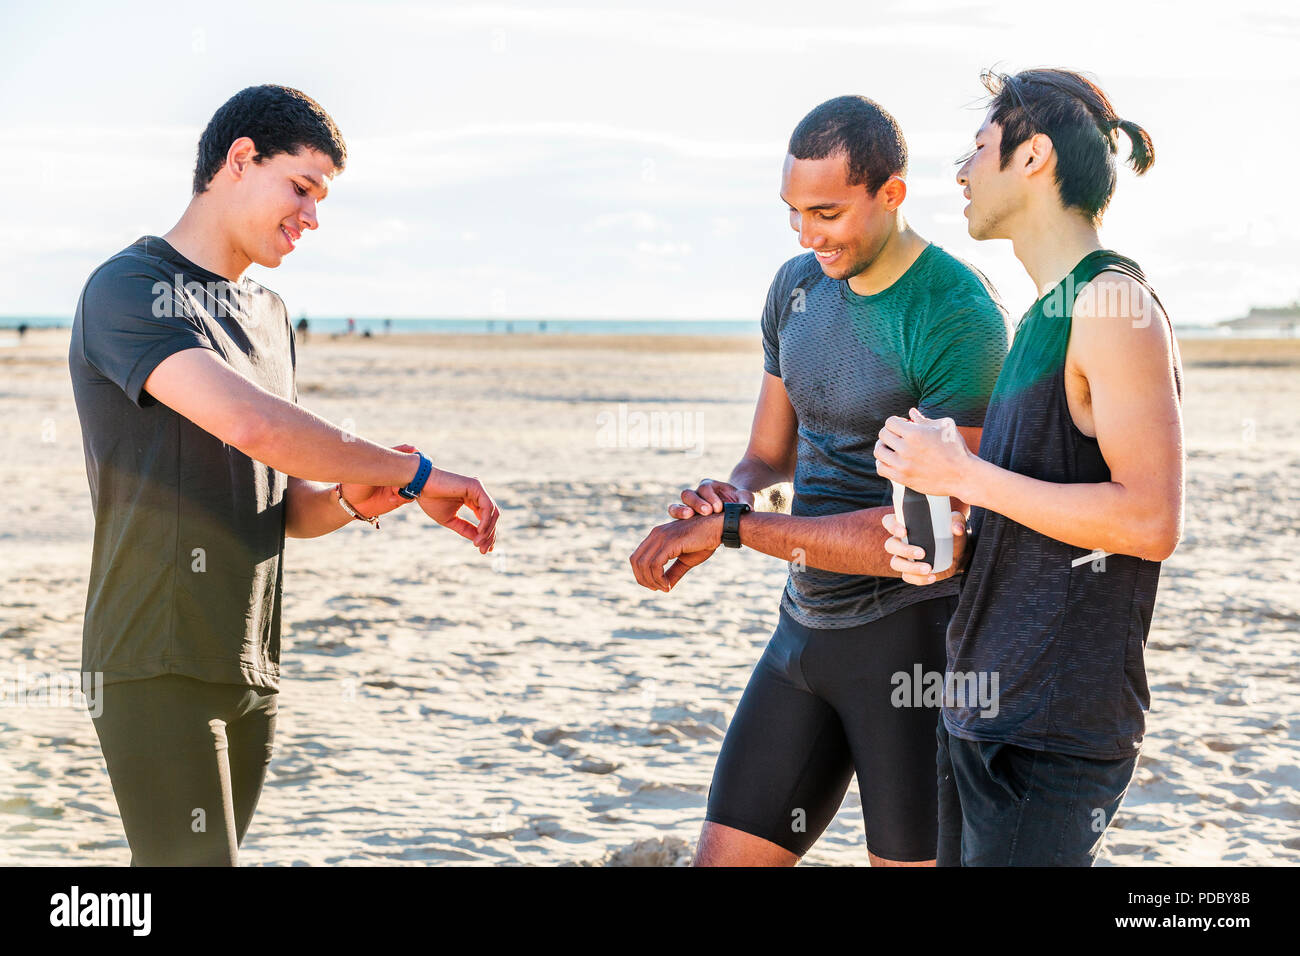 Male runners checking smart watch fitness trackers on sunny beach Stock Photo